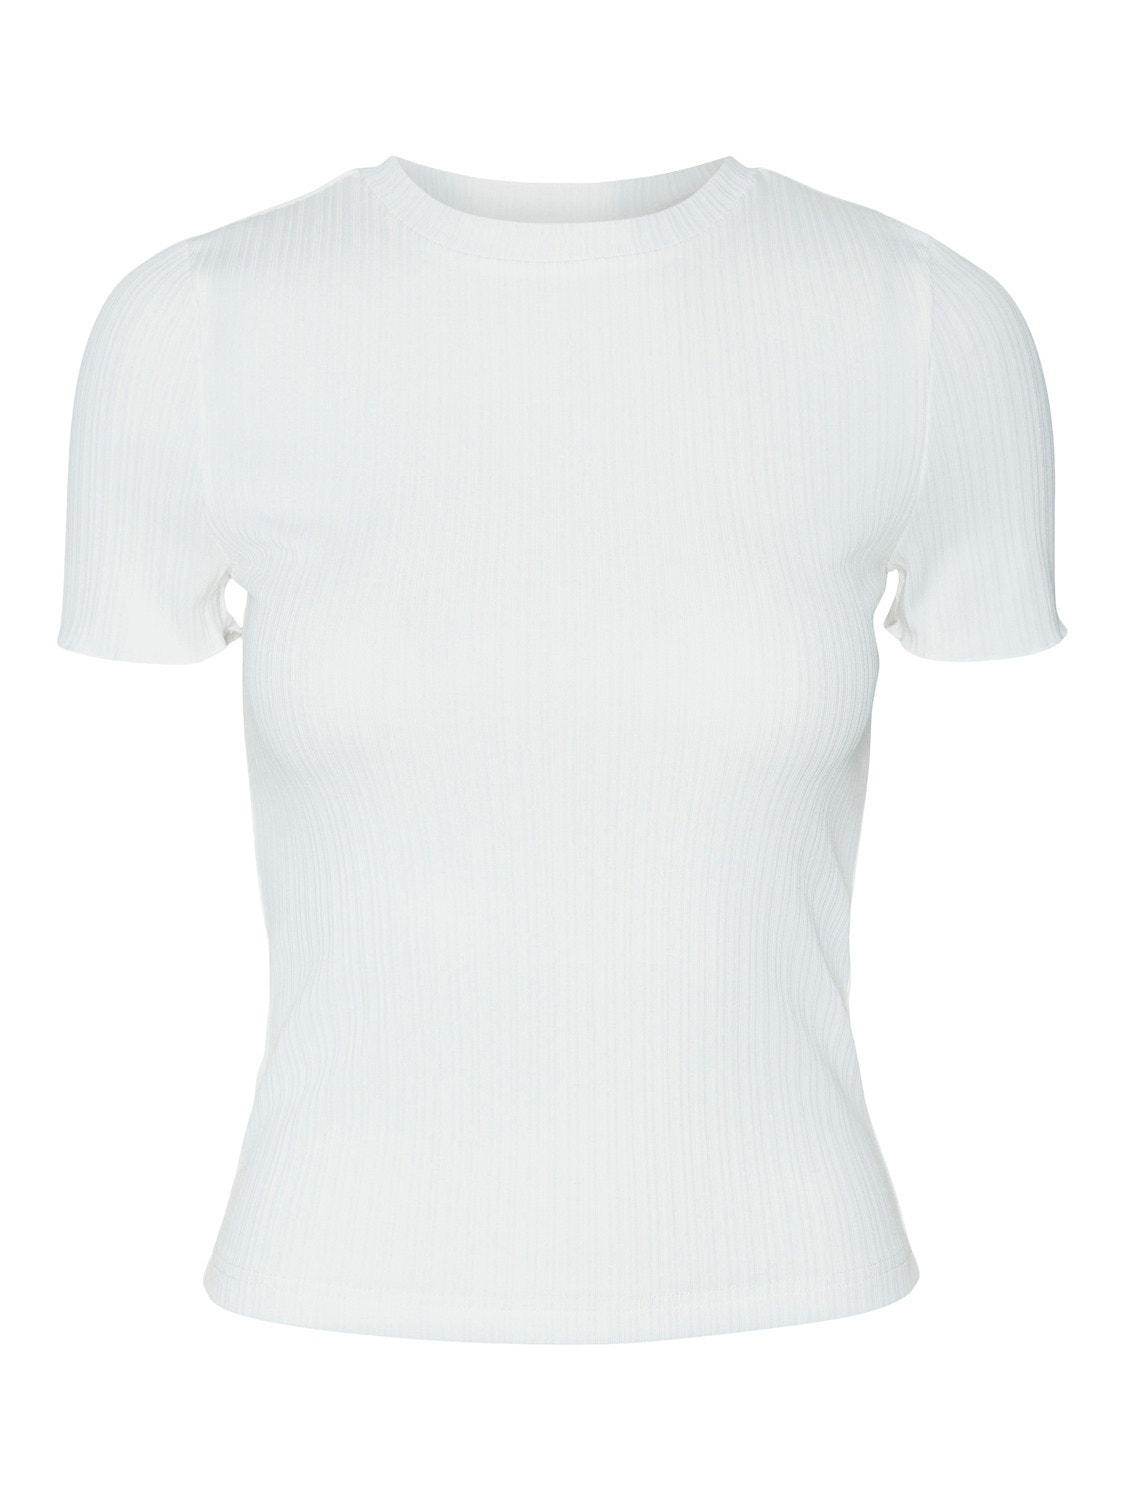 Vero Moda SOMETHING NEW PROJECT; CHLOE FRATER T-shirts -Snow White - 10306599